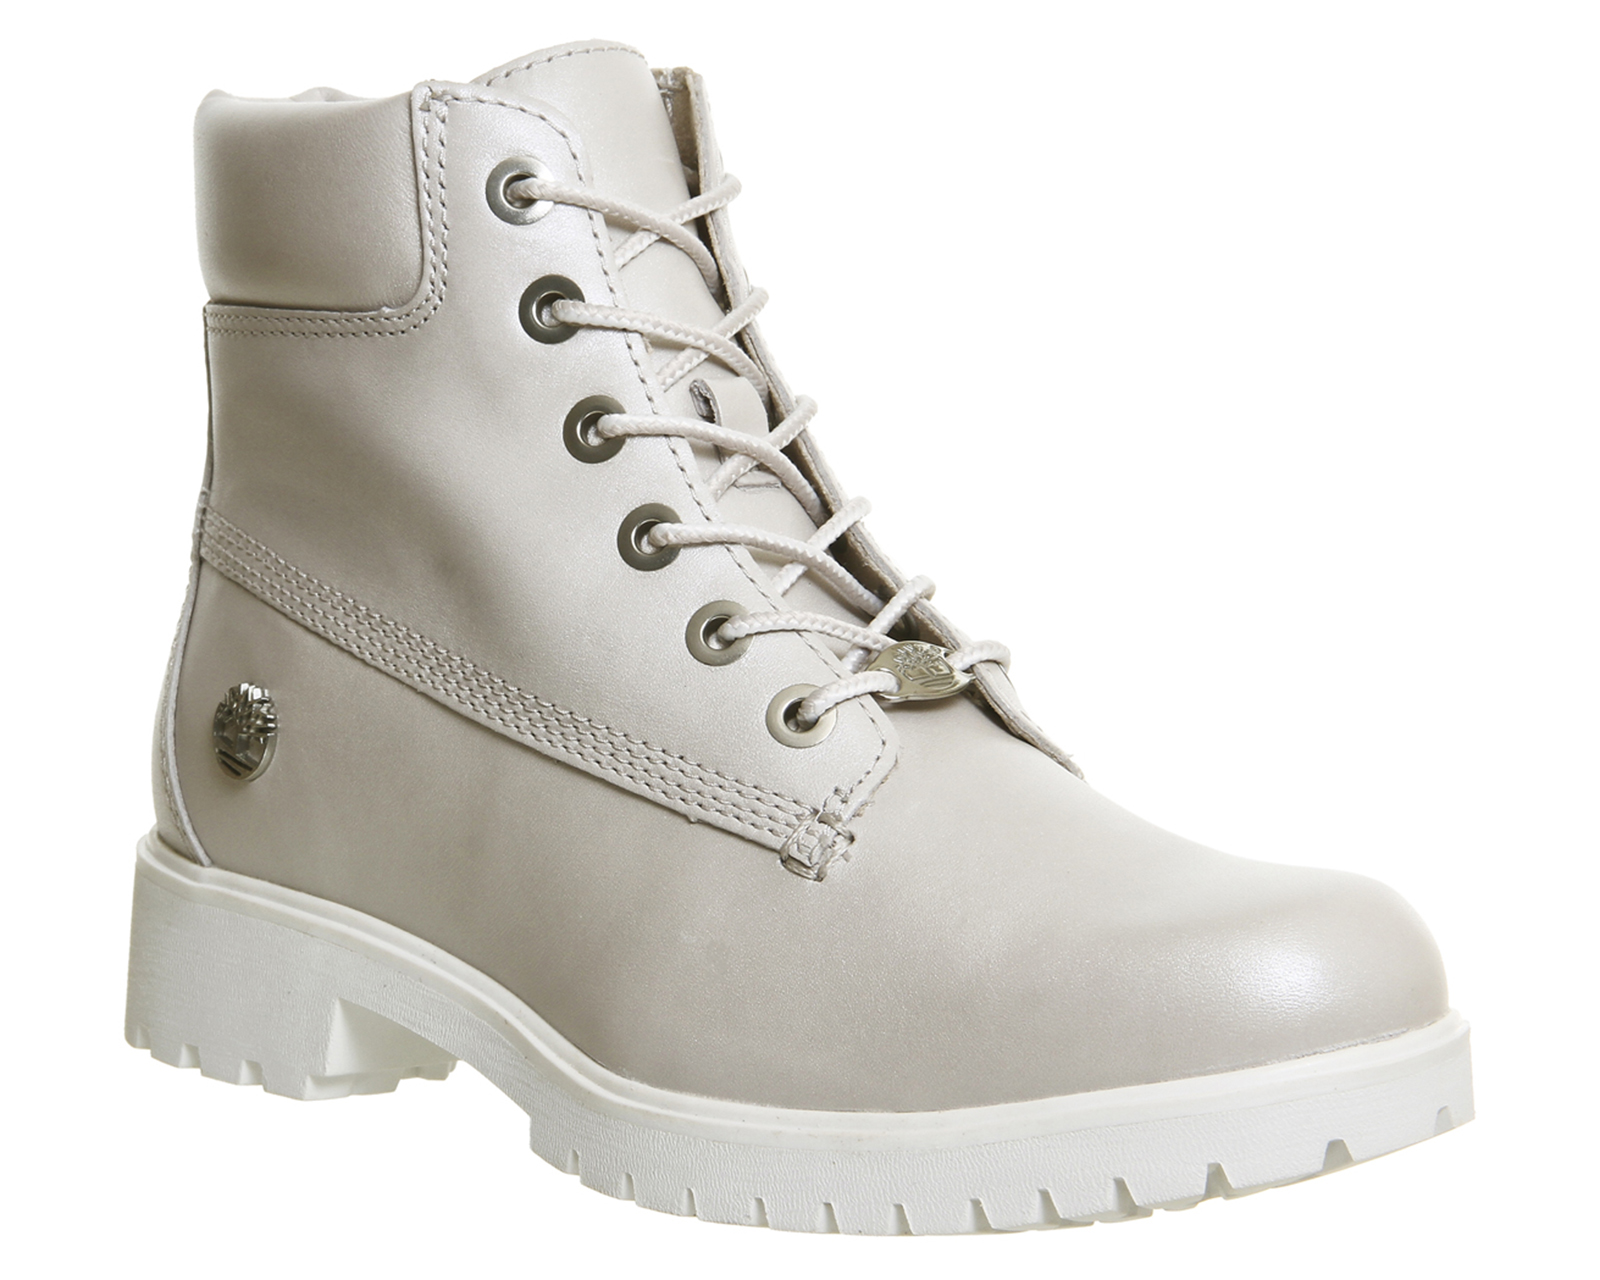 grey timberland boots womens sale